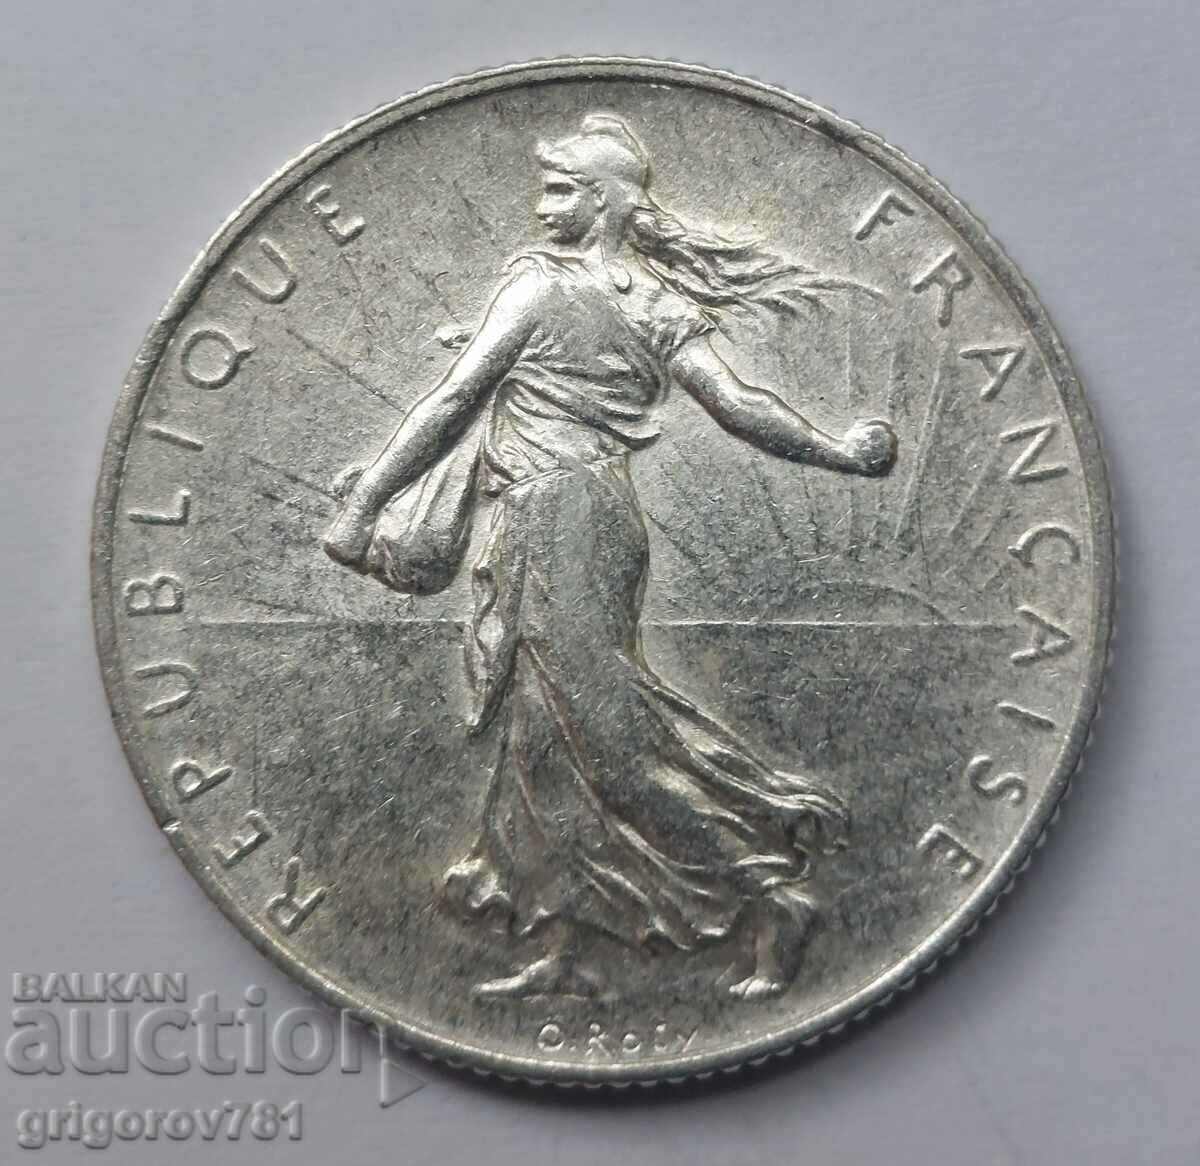 2 Francs Silver France 1915 - Silver Coin #61